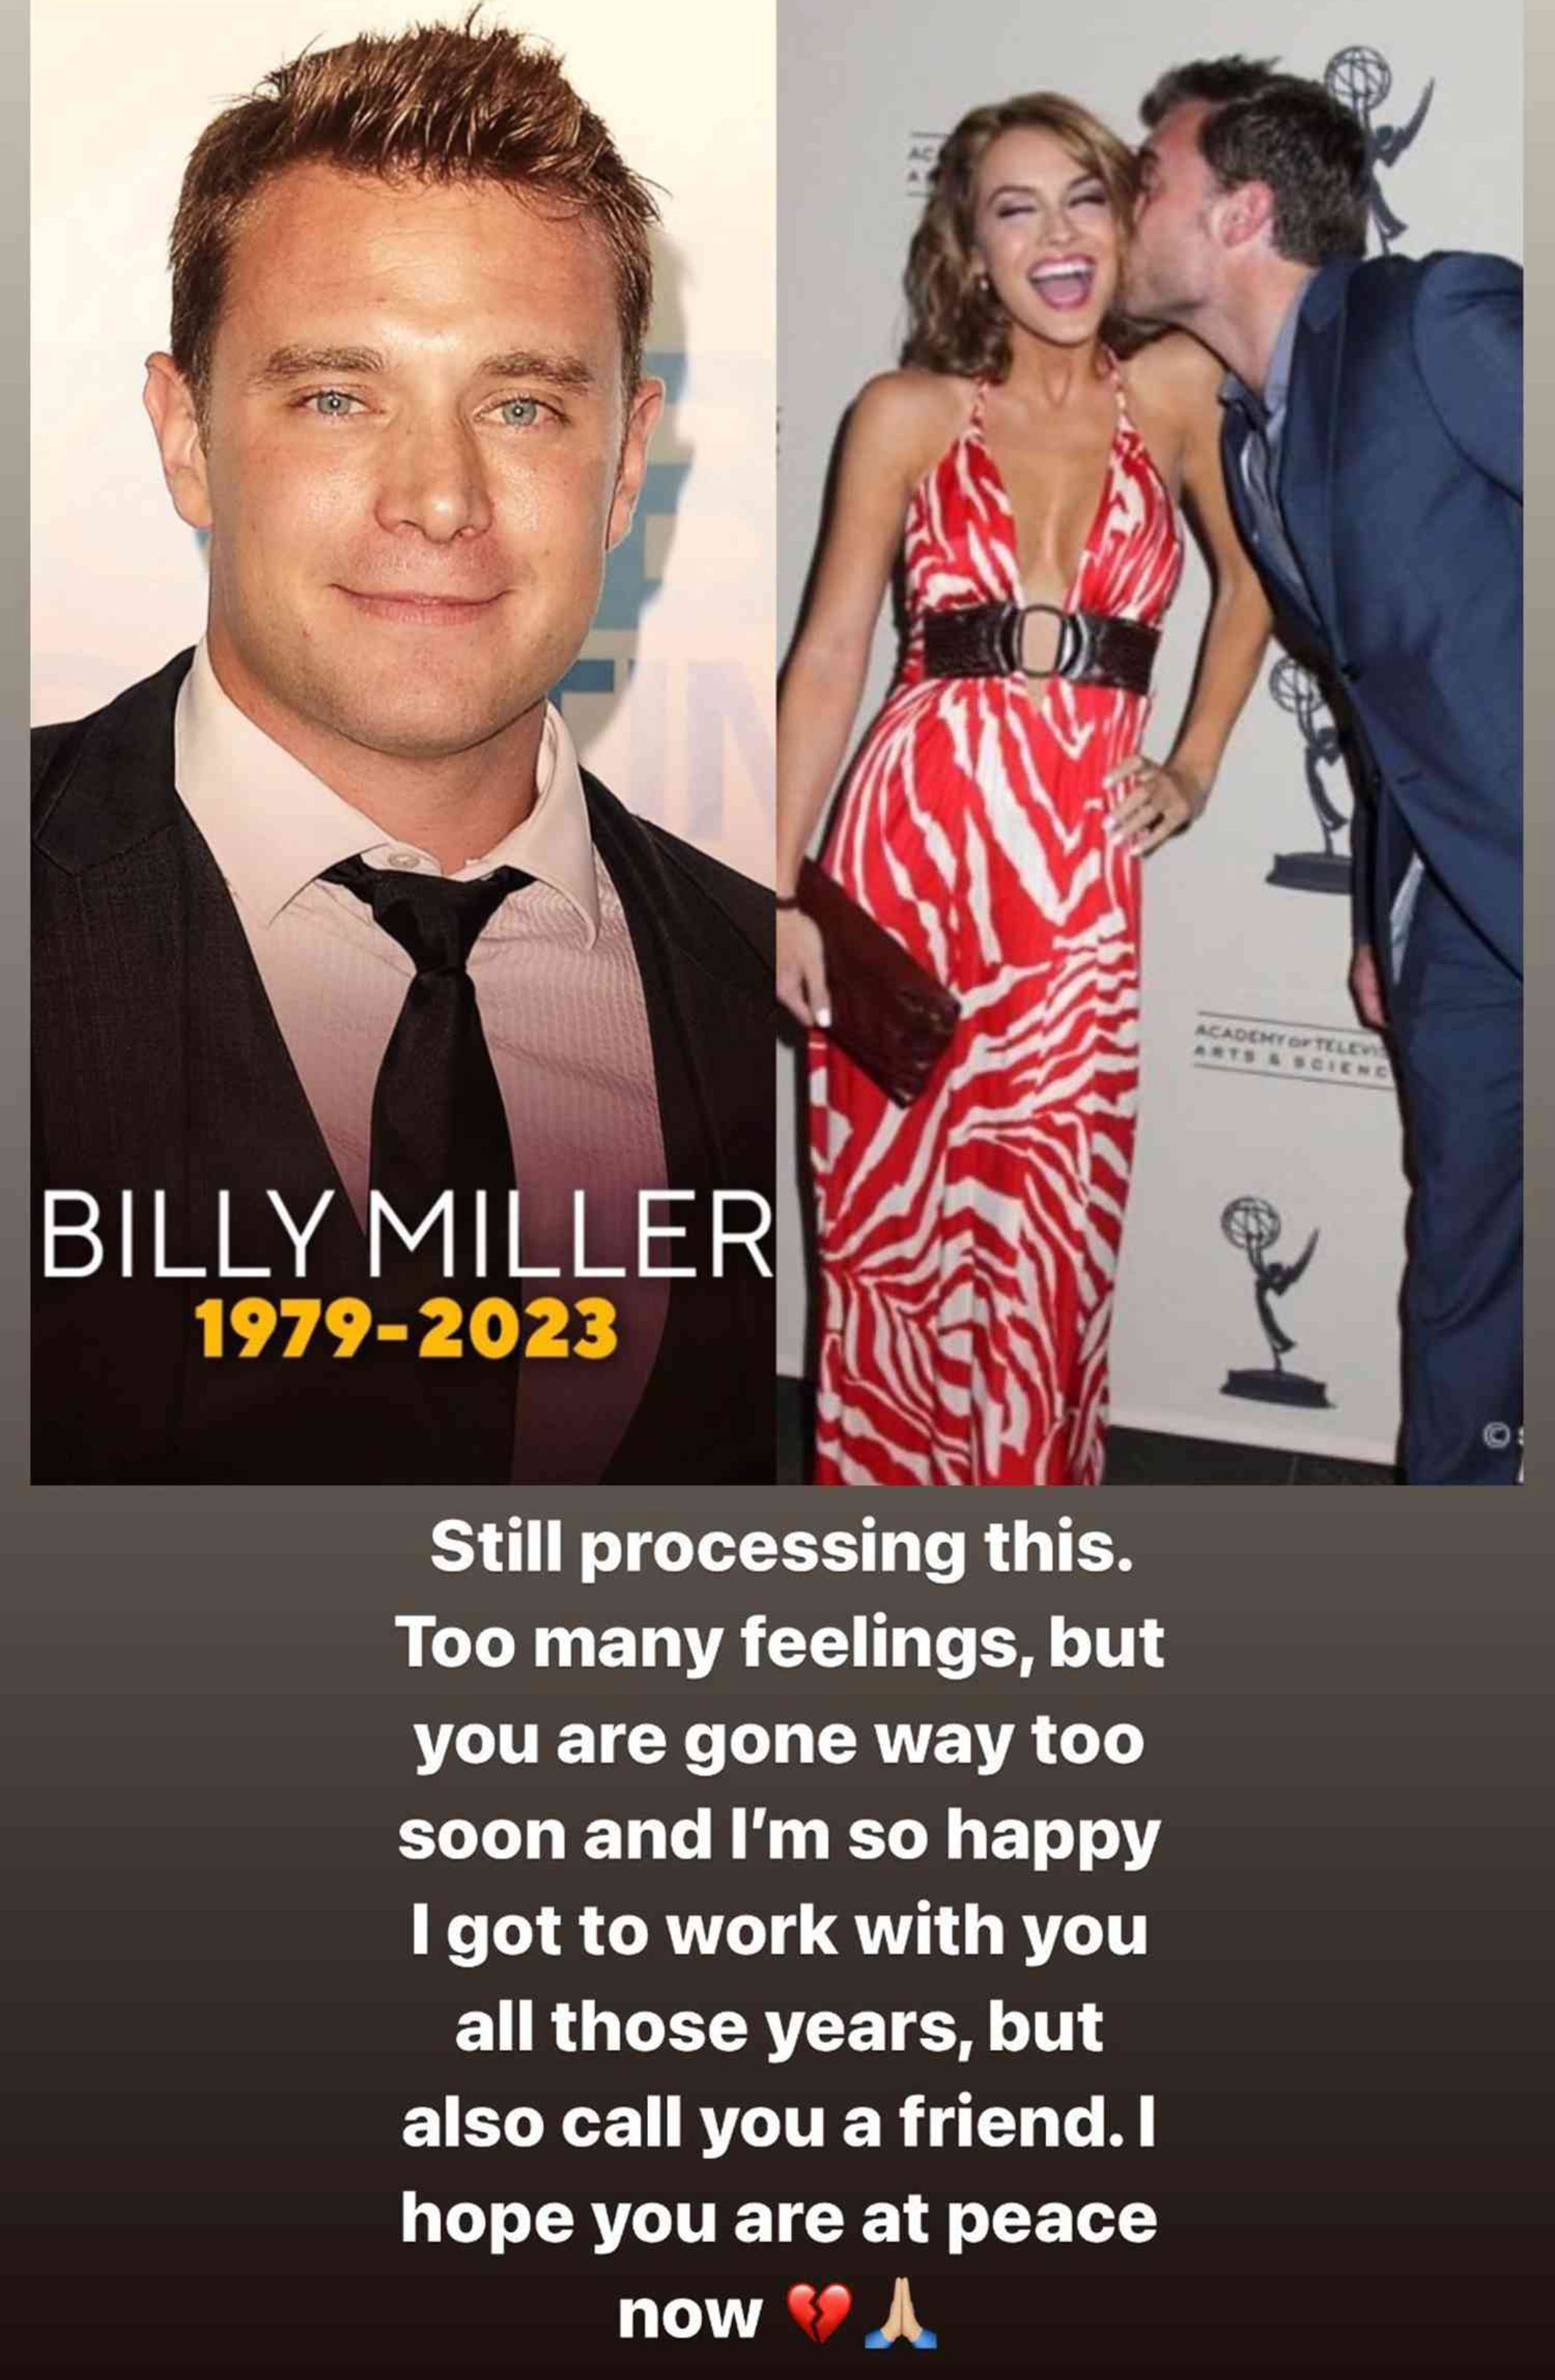 Chrishell Stause remembers late co-star Billy Miller in heartfelt tribute